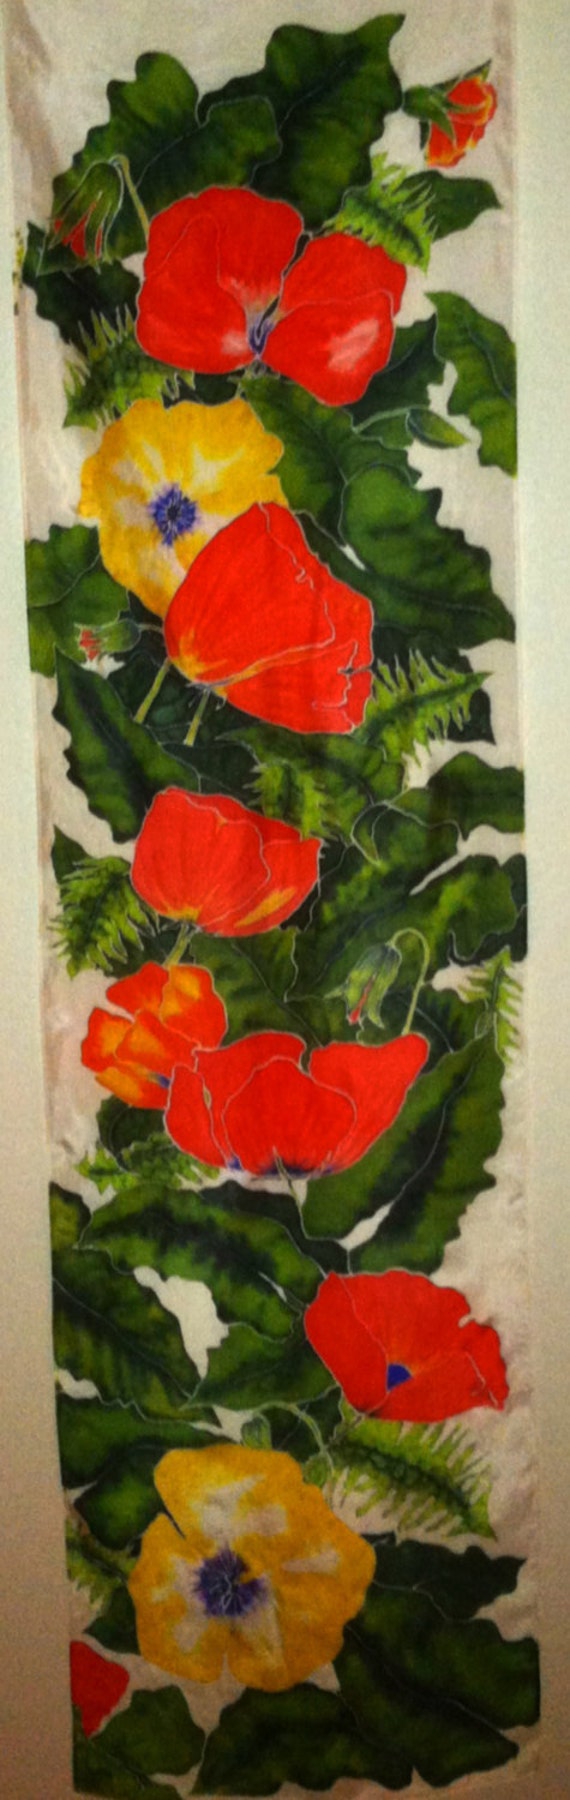 CRIMSON ABOUNDS - Hand Painted Silk Wall Hanging